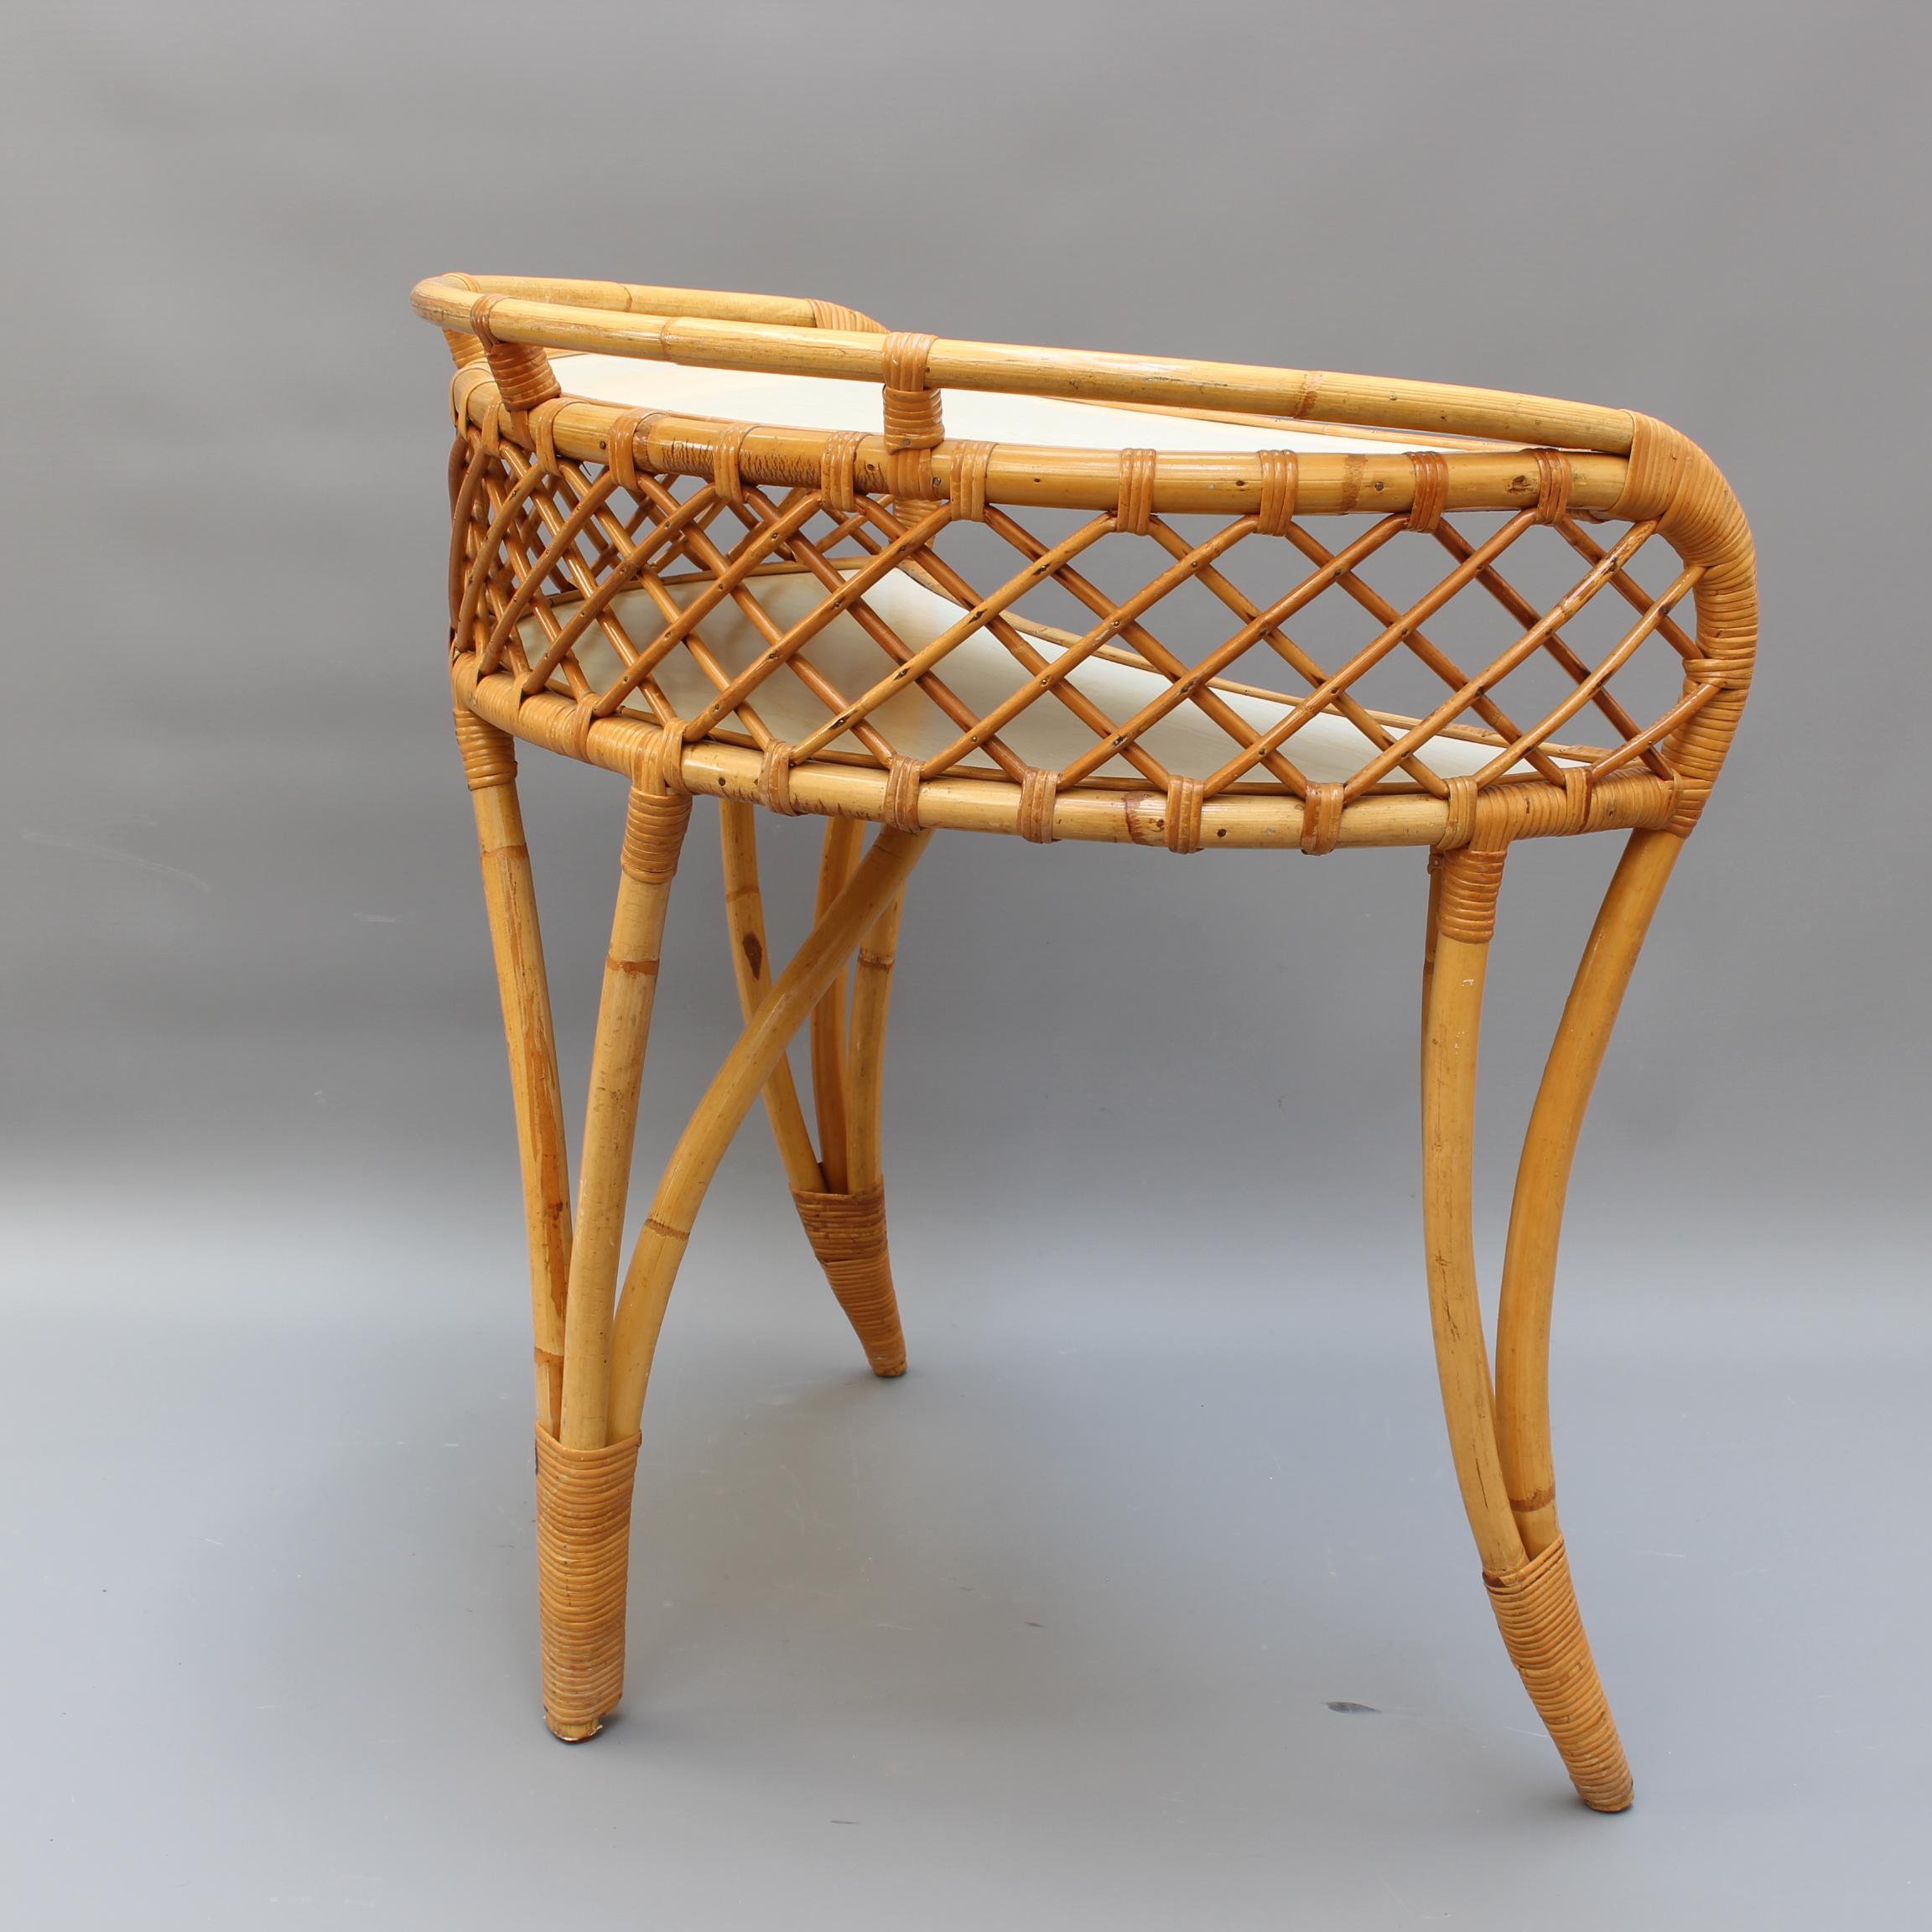 Midcentury Italian Rattan Desk or Vanity Table, circa 1960s In Good Condition For Sale In London, GB